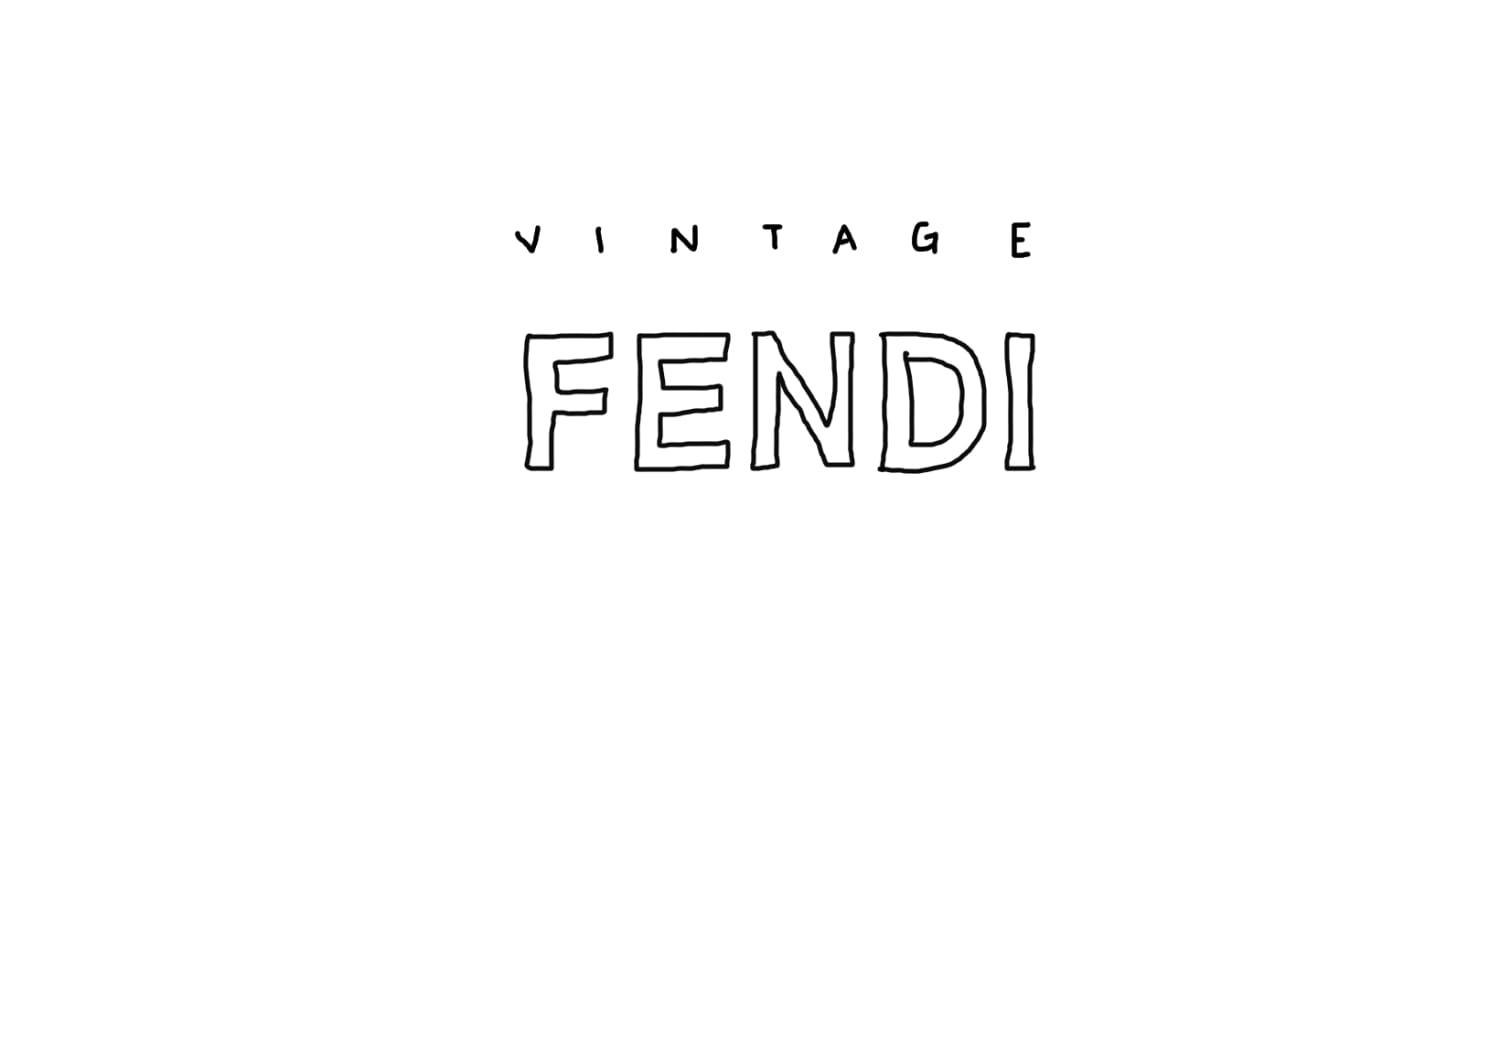 what's in my vintage Fendi bag 🤎, Gallery posted by AJ